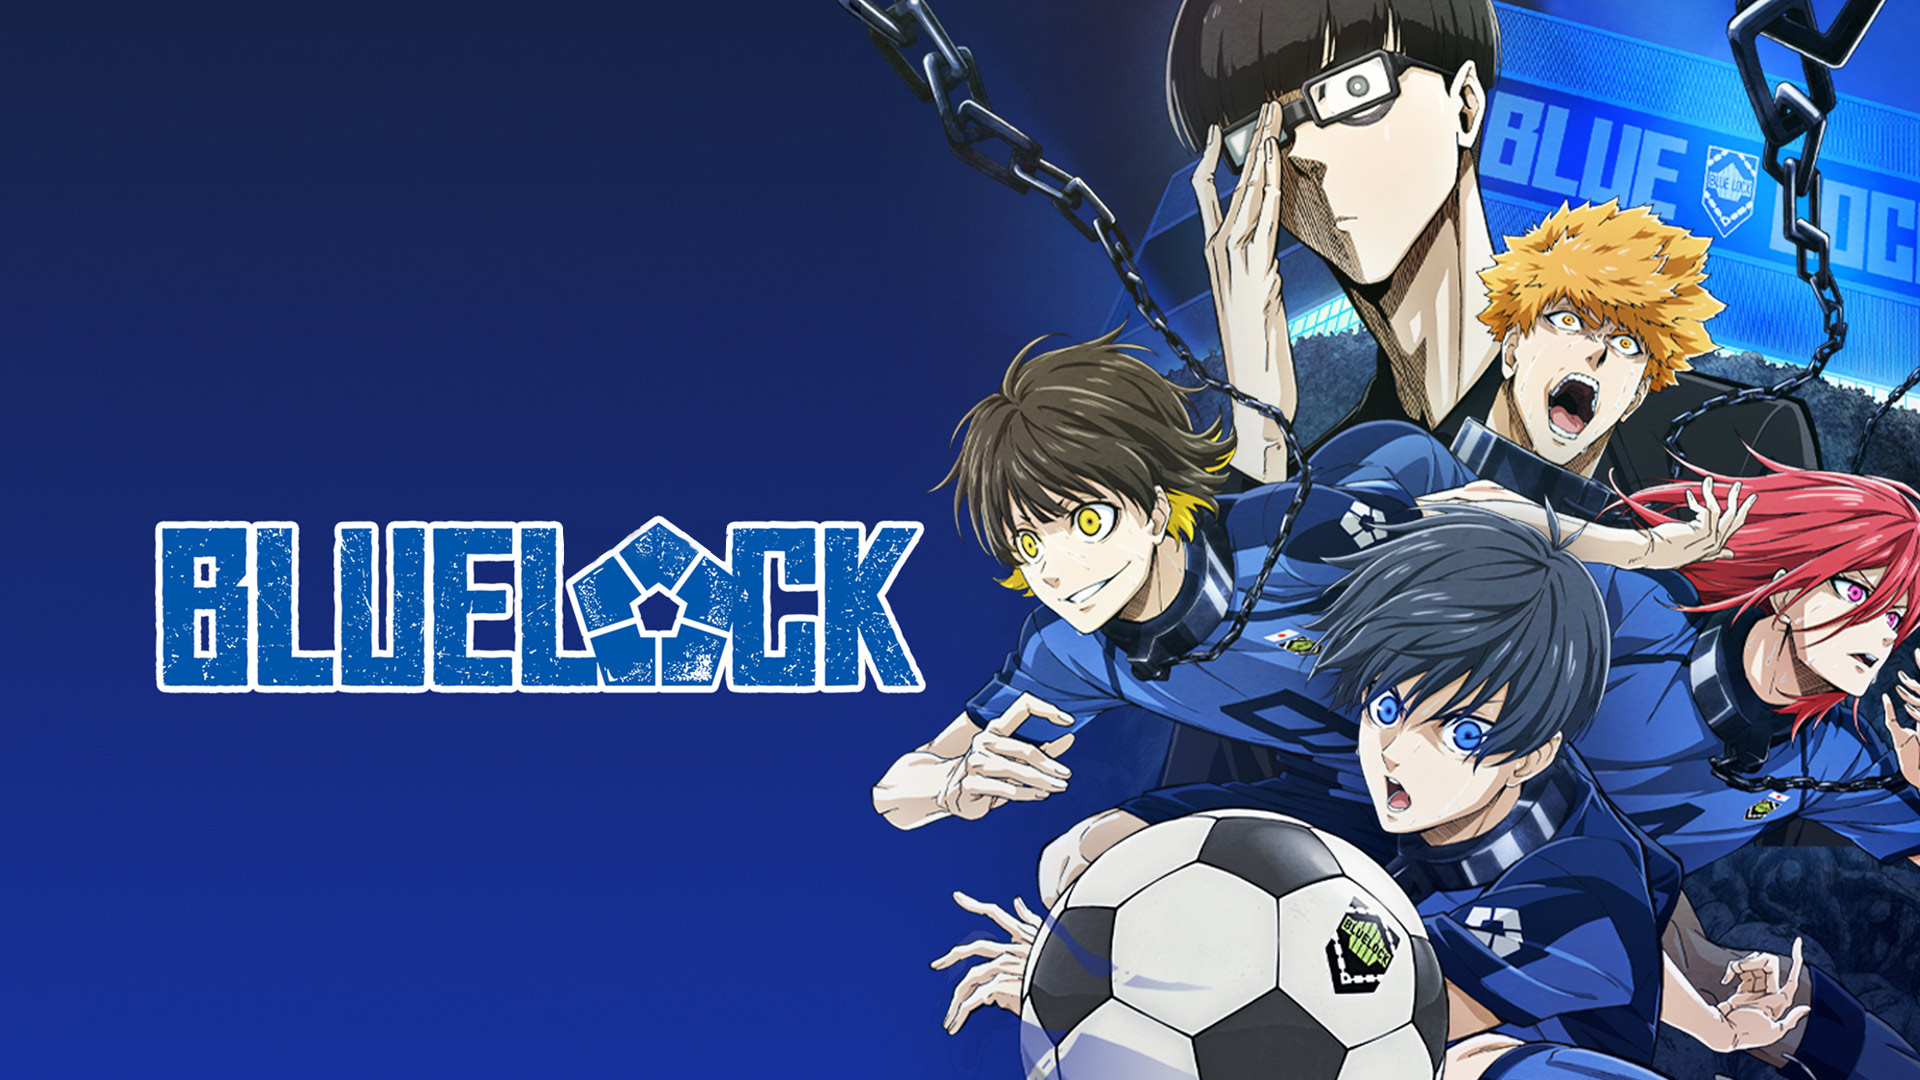 Where to Watch Blue Lock: All You Want to Know